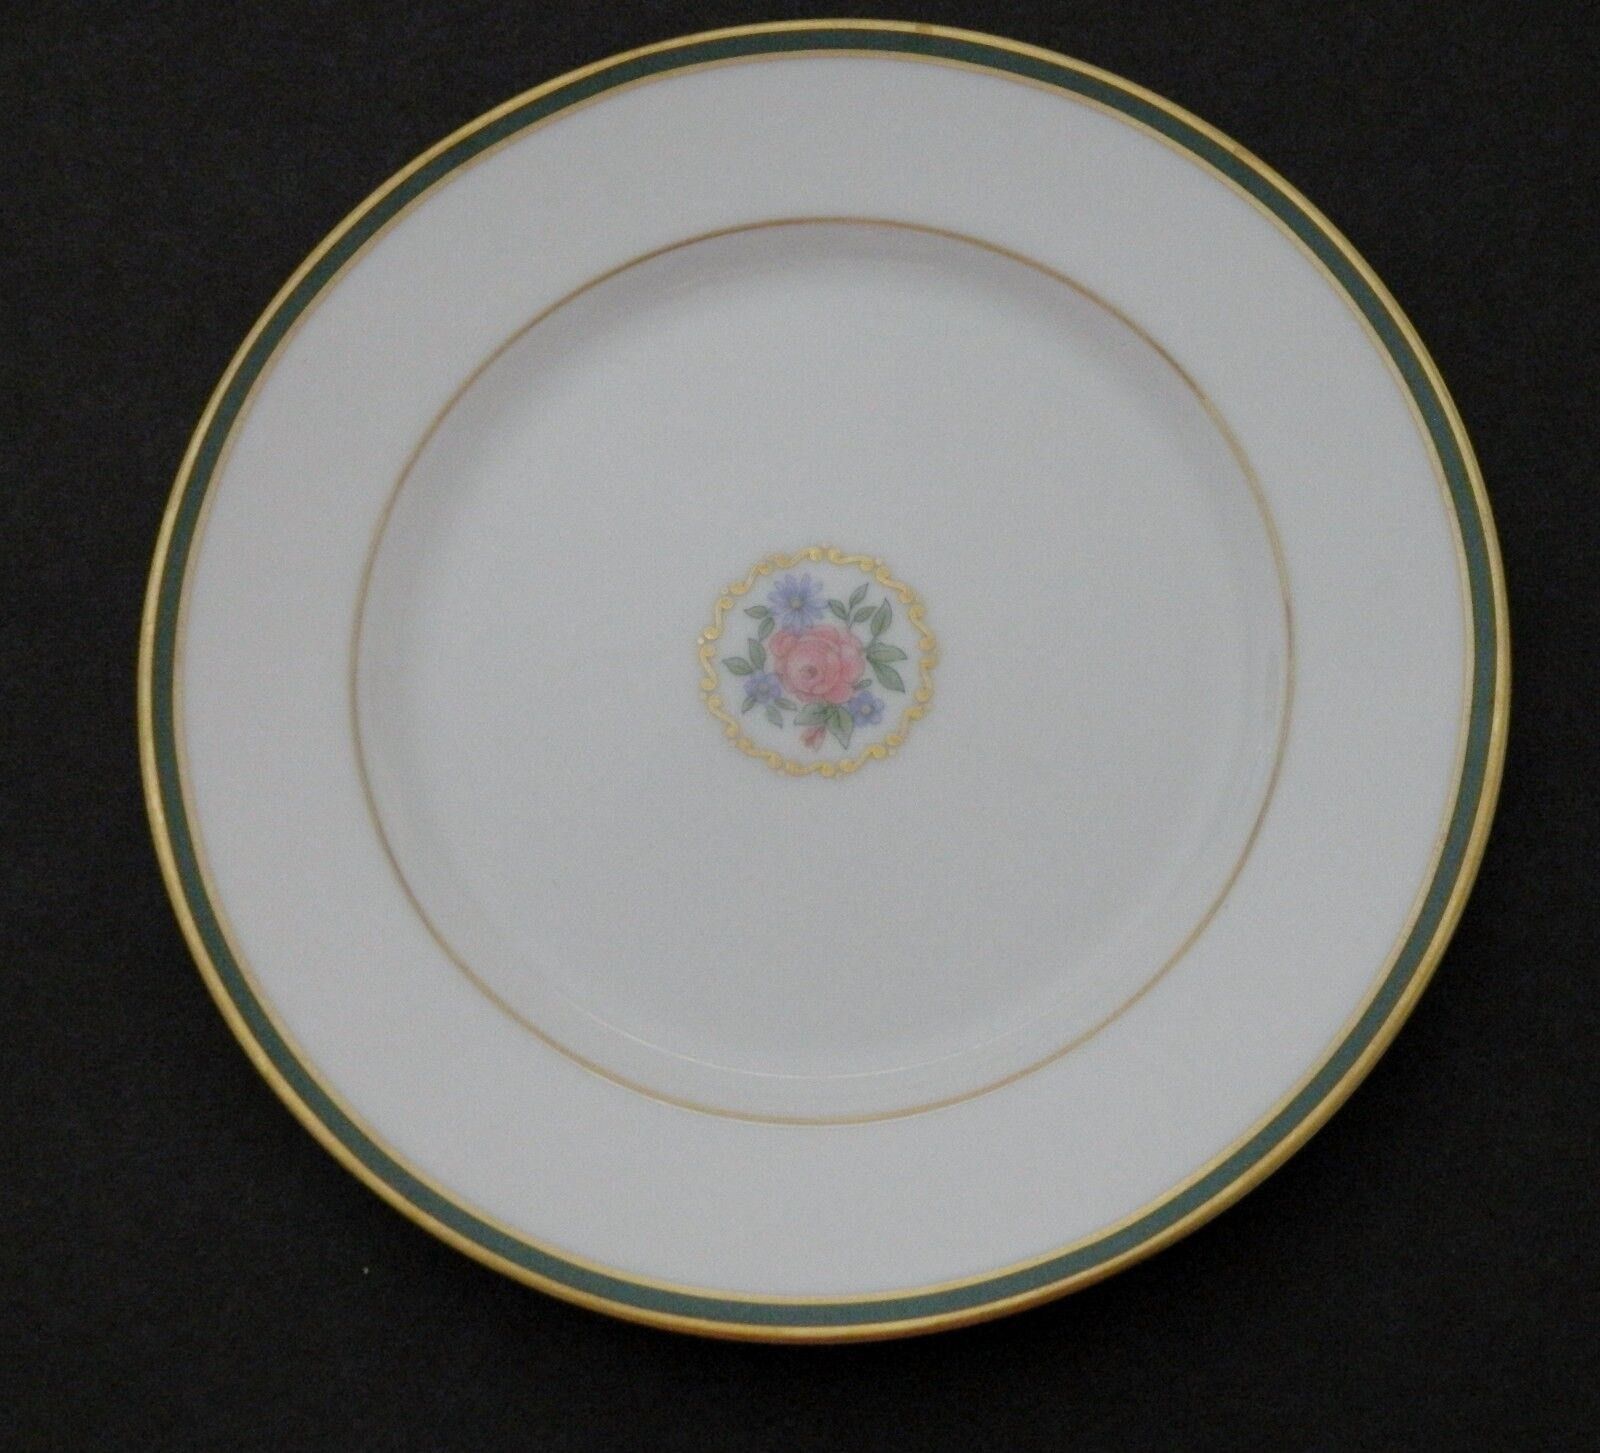 Gorham Fine China Valcourt Gold Accent Salad Plate Made in Japan Decorated n USA